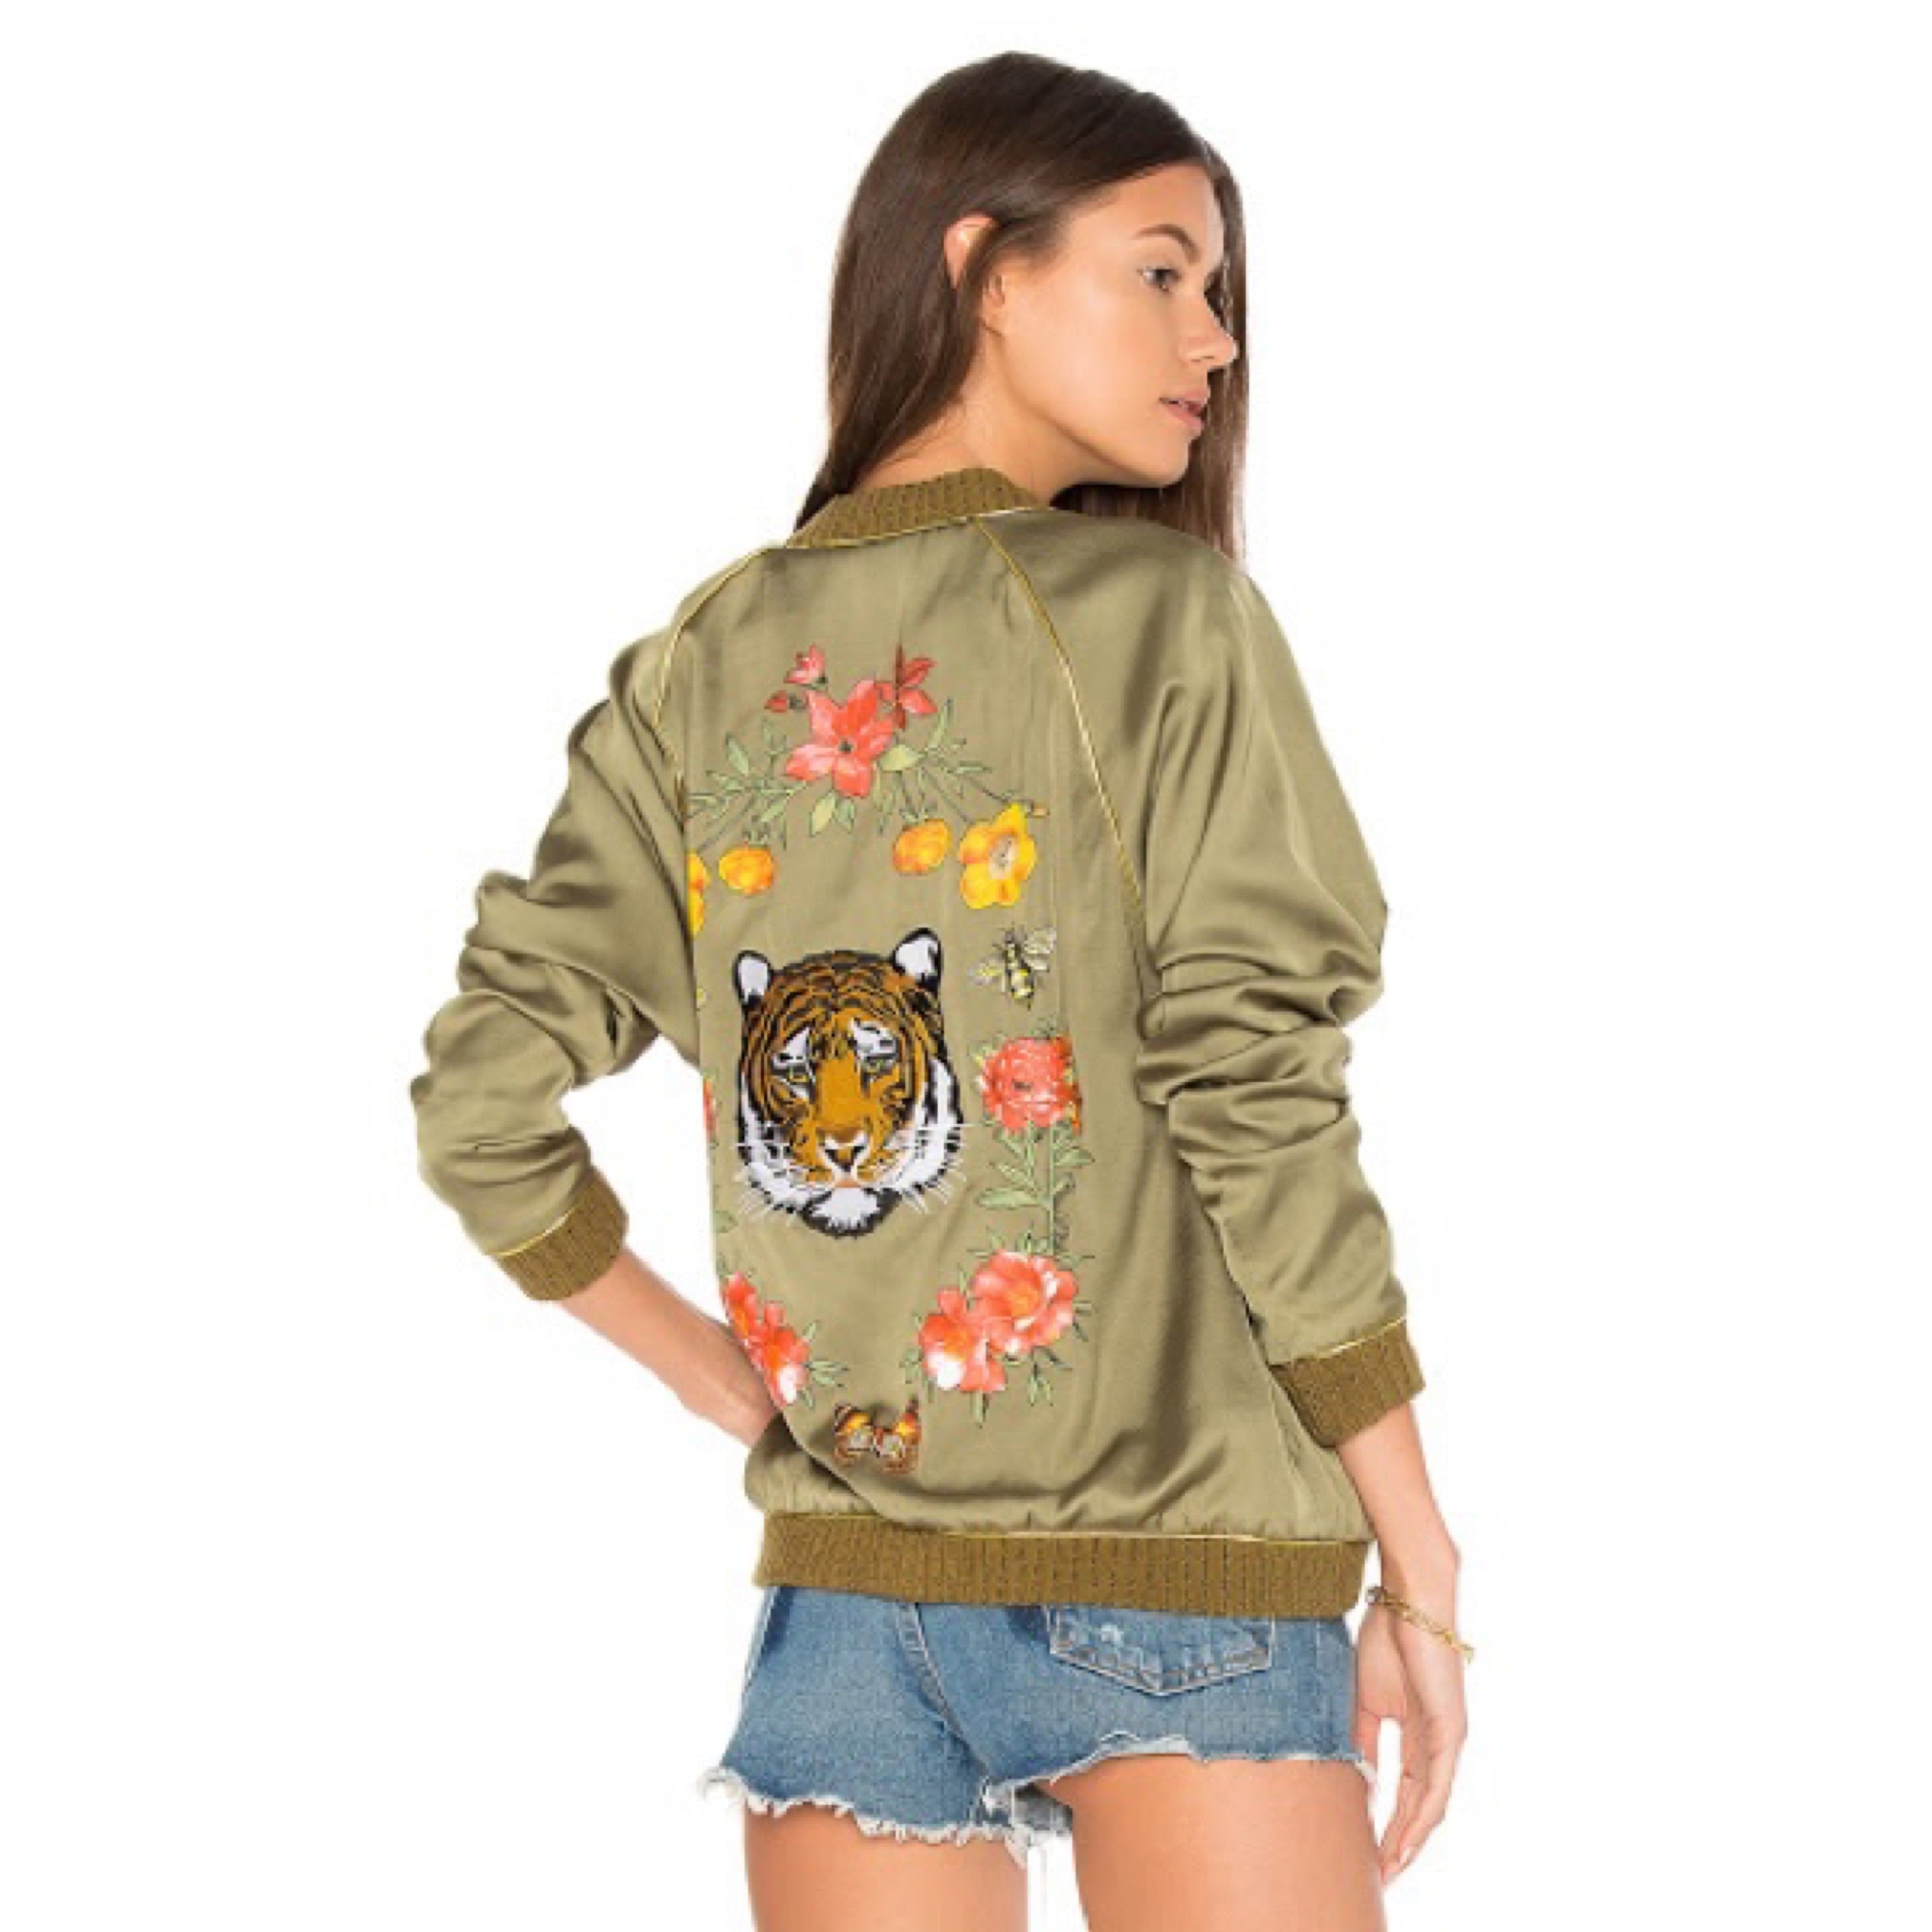 Paris Bomber Jacket in Army